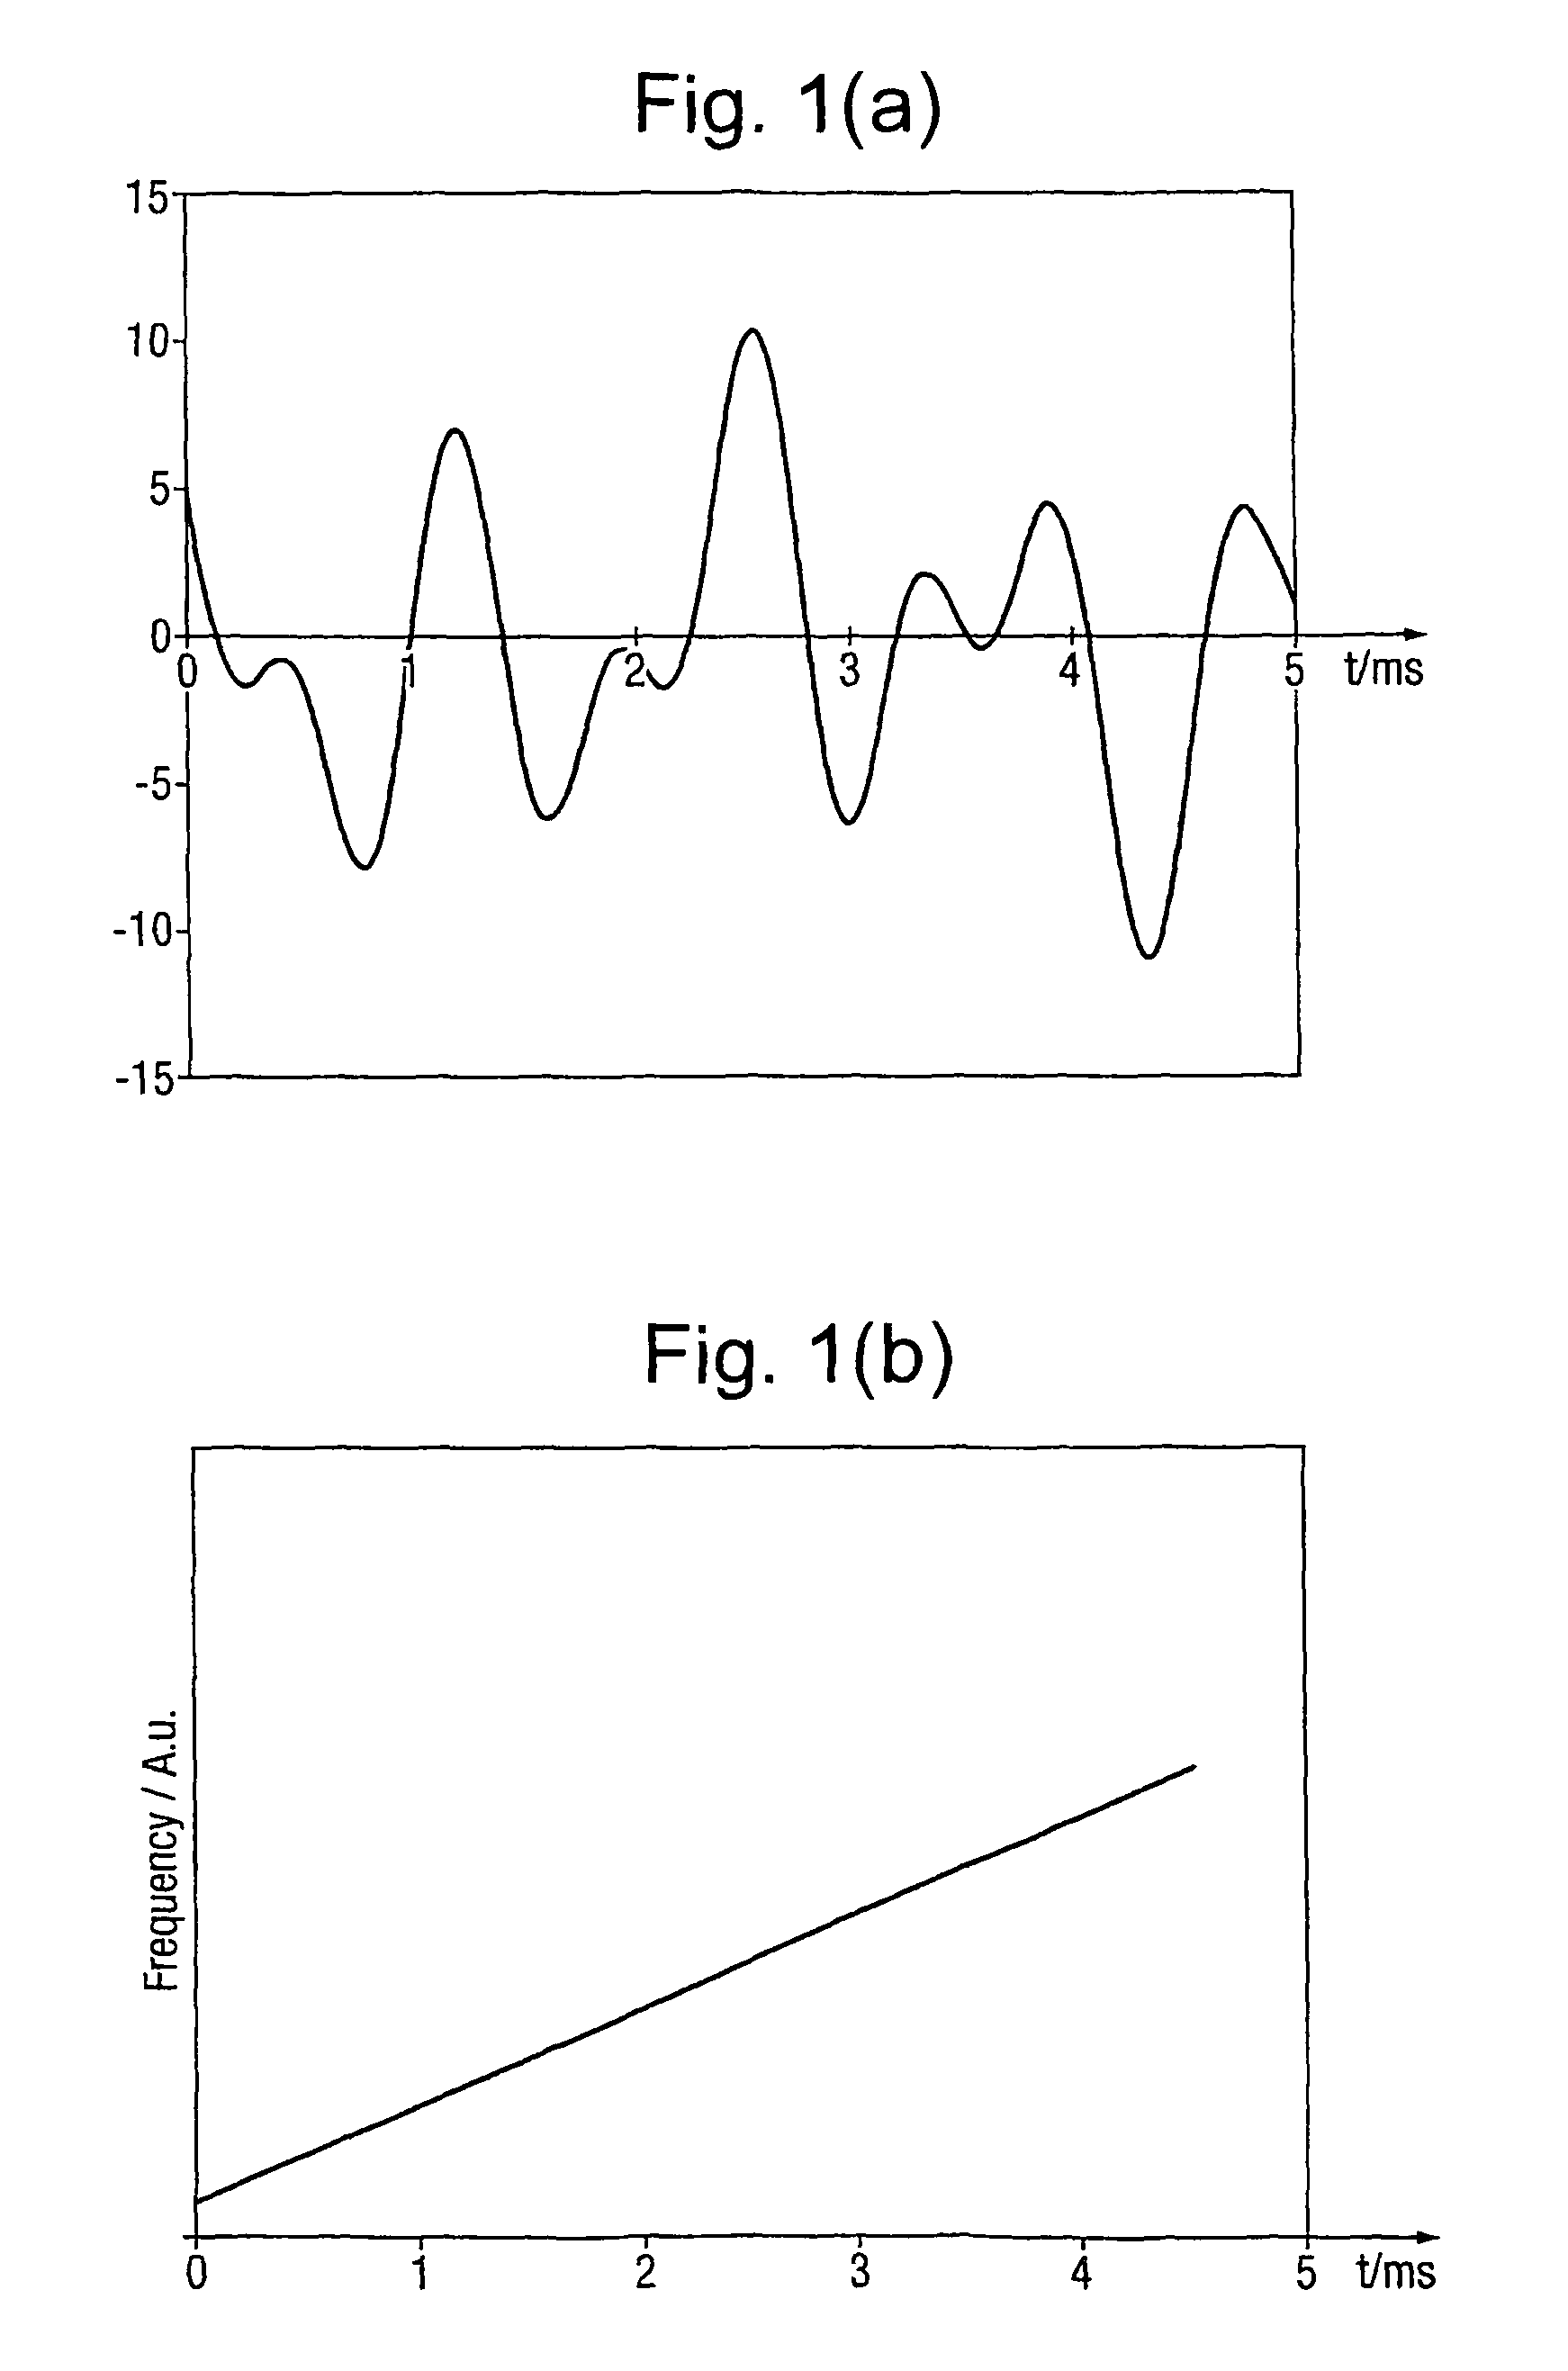 Coherent frequency modulated continuous wave radar